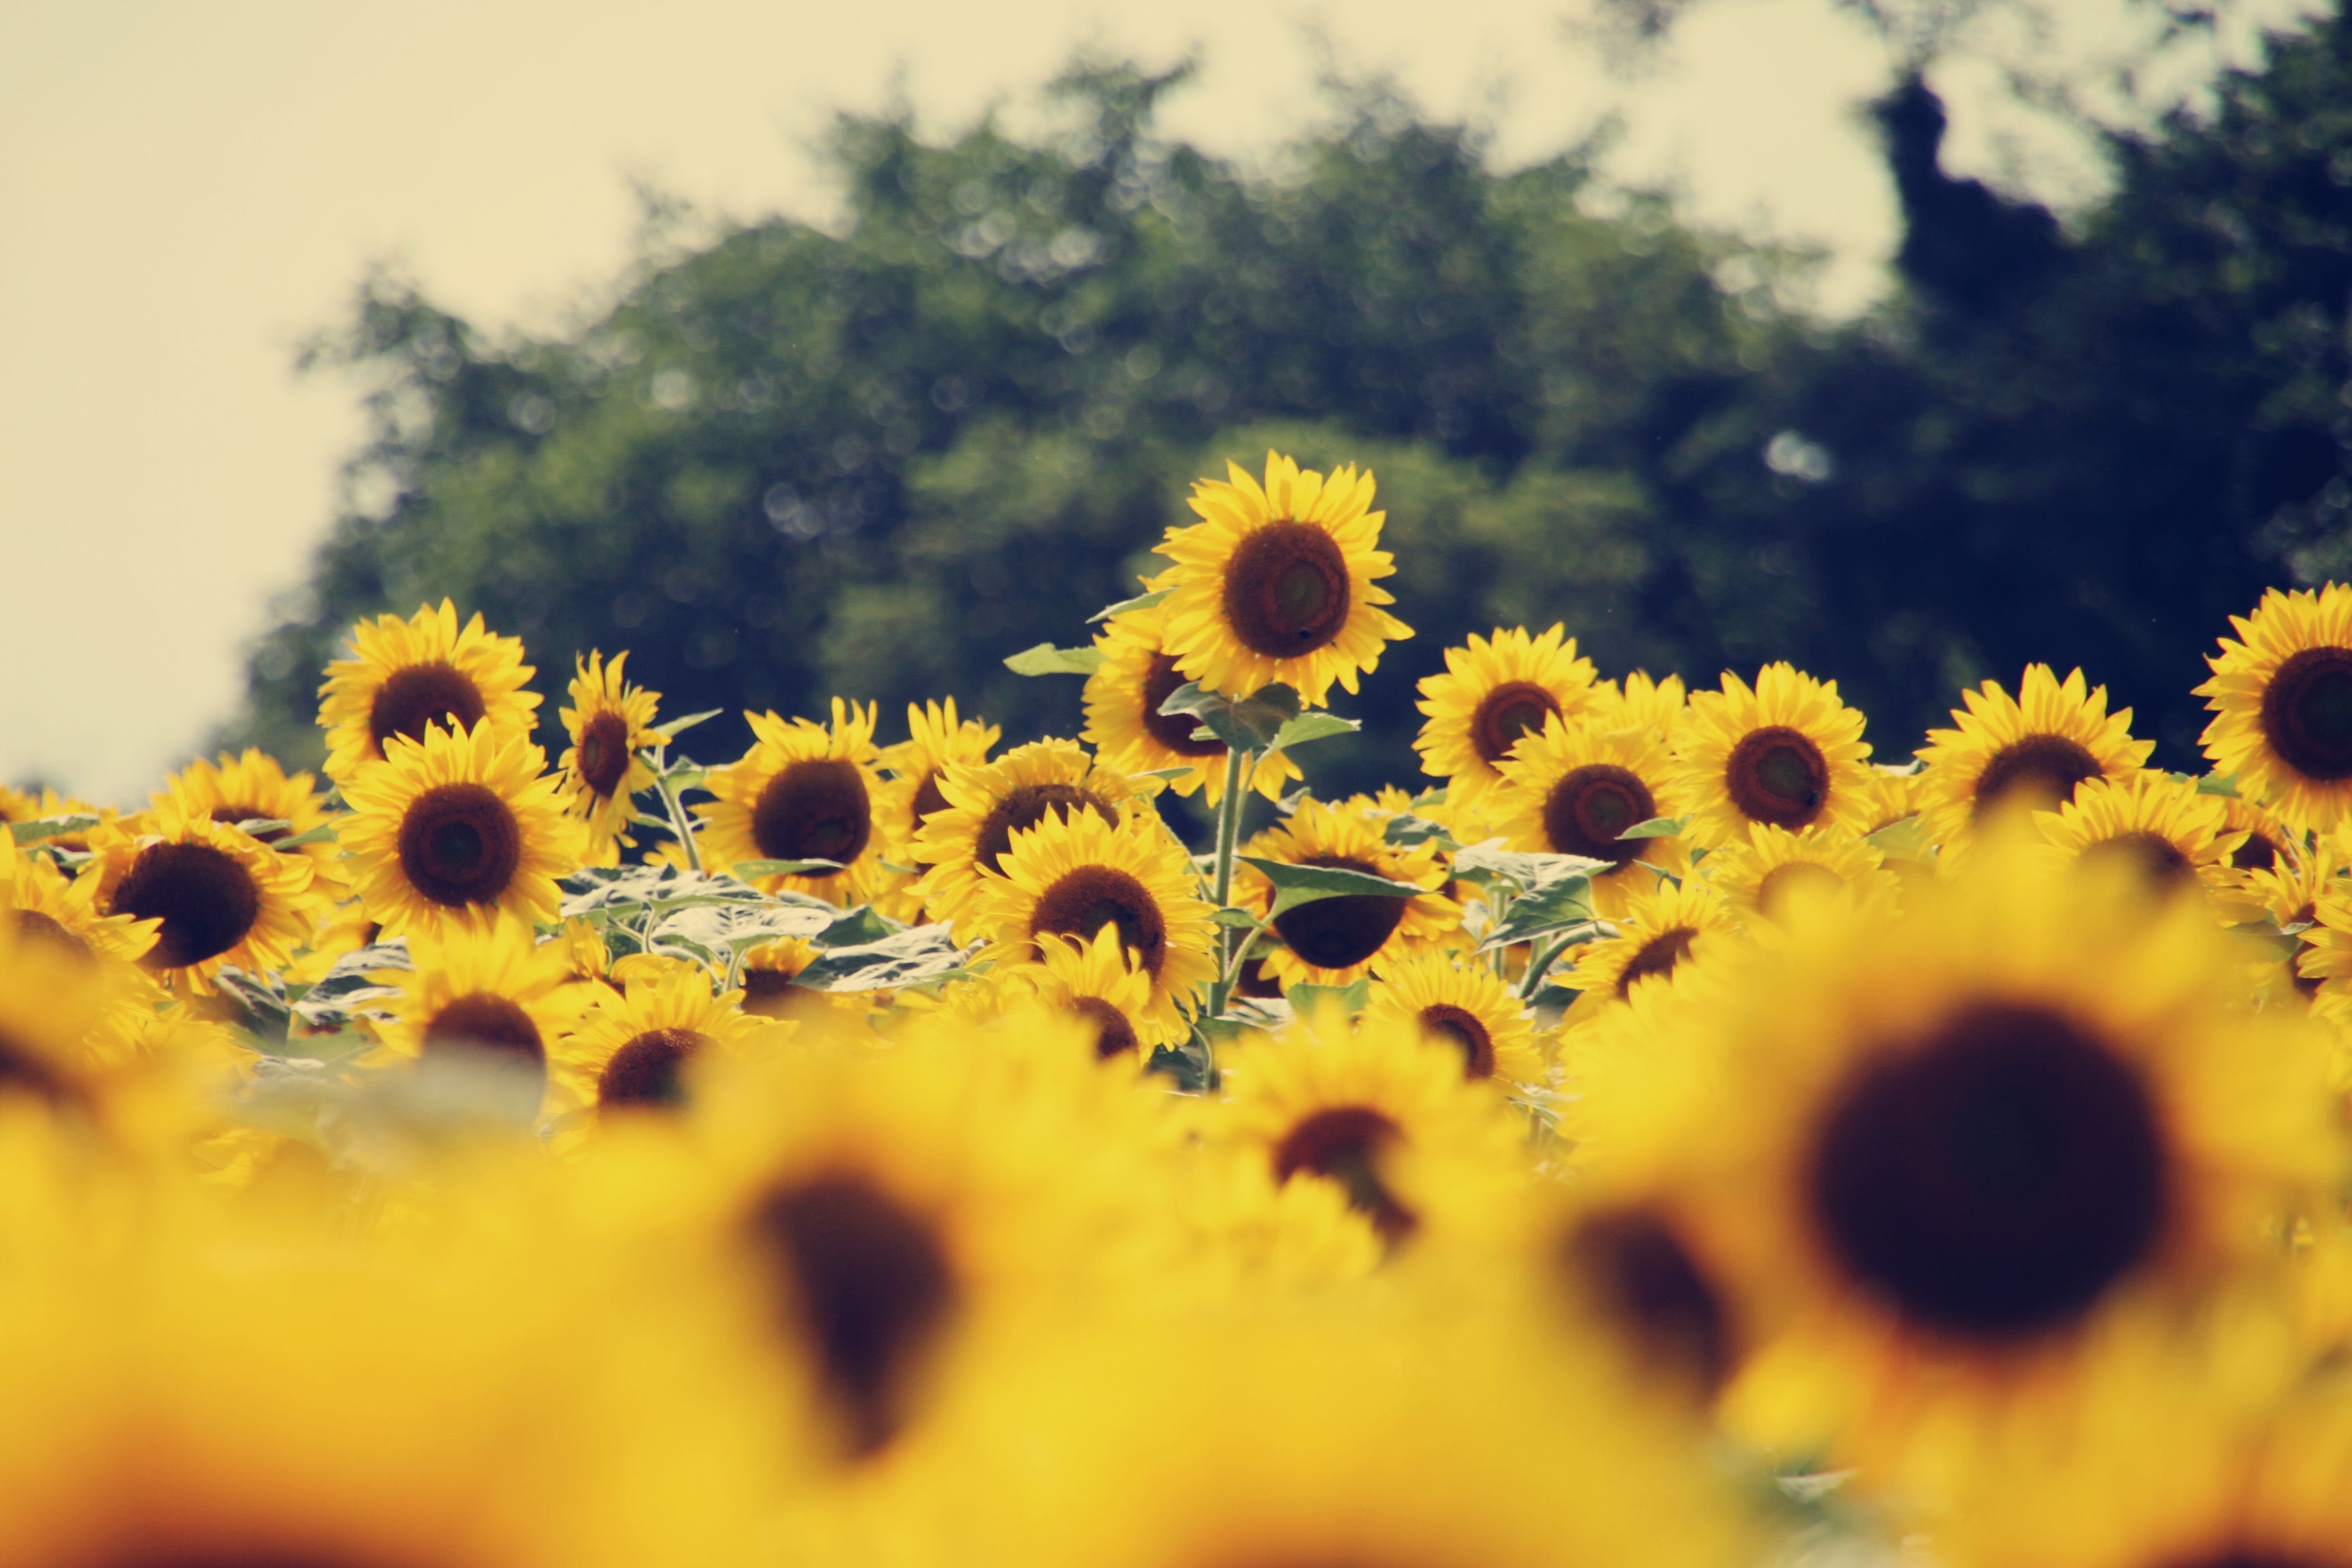 A field of sunflowers with a few trees in the background. - Sunflower